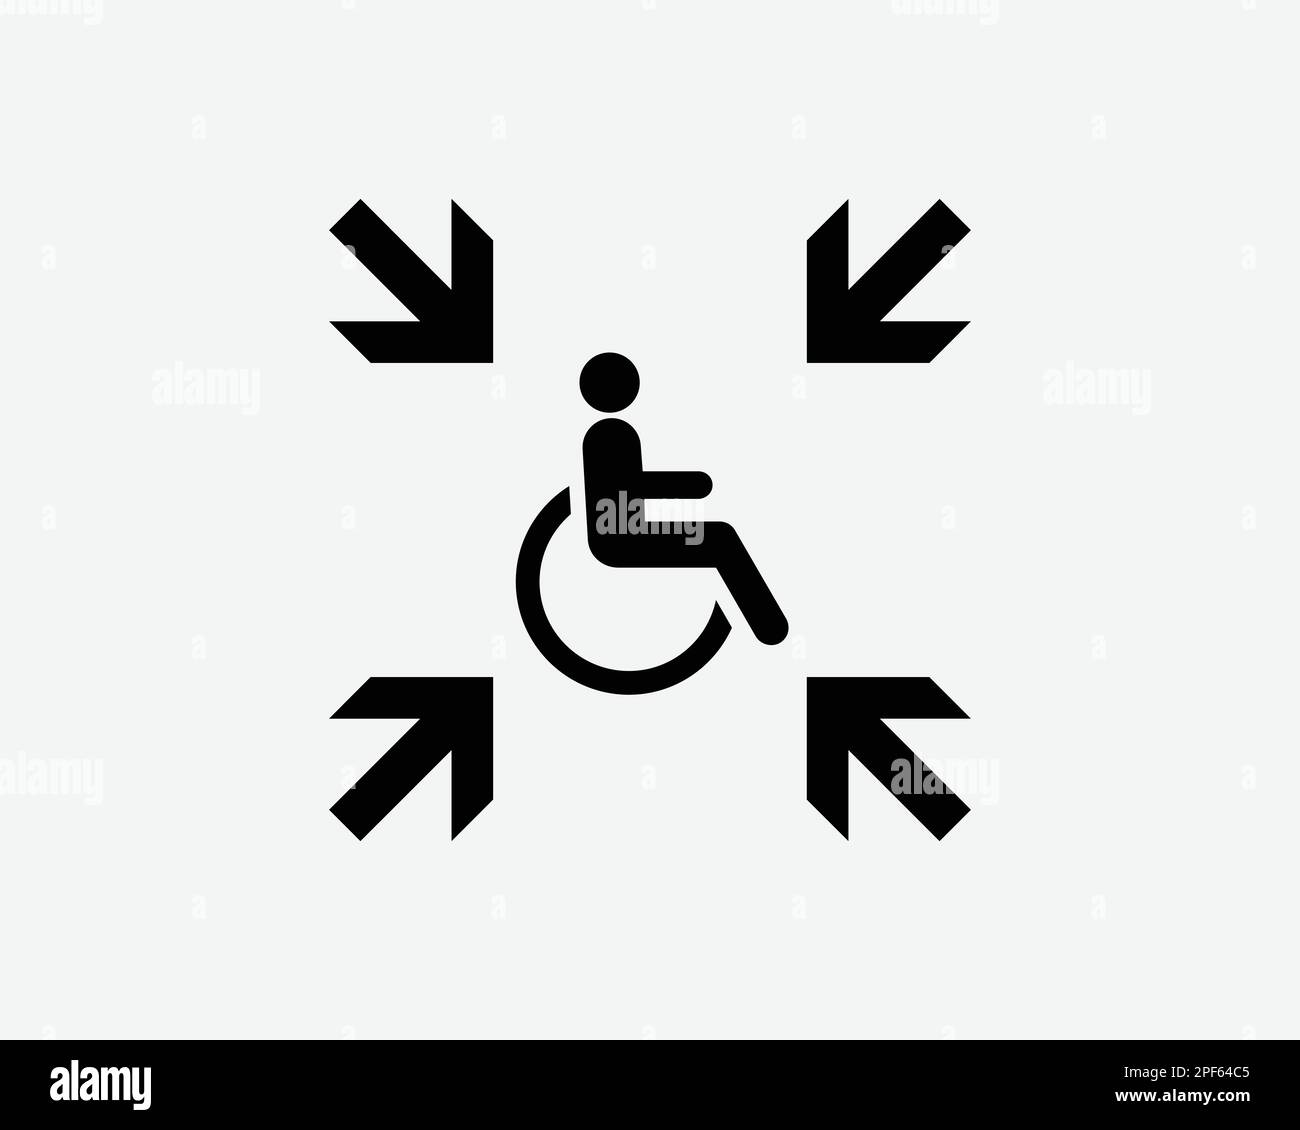 Disable People Person Emergency Assembly Gathering Point Black White Silhouette Sign Symbol Icon Graphic Clipart Artwork Illustration Pictogram Vector Stock Vector